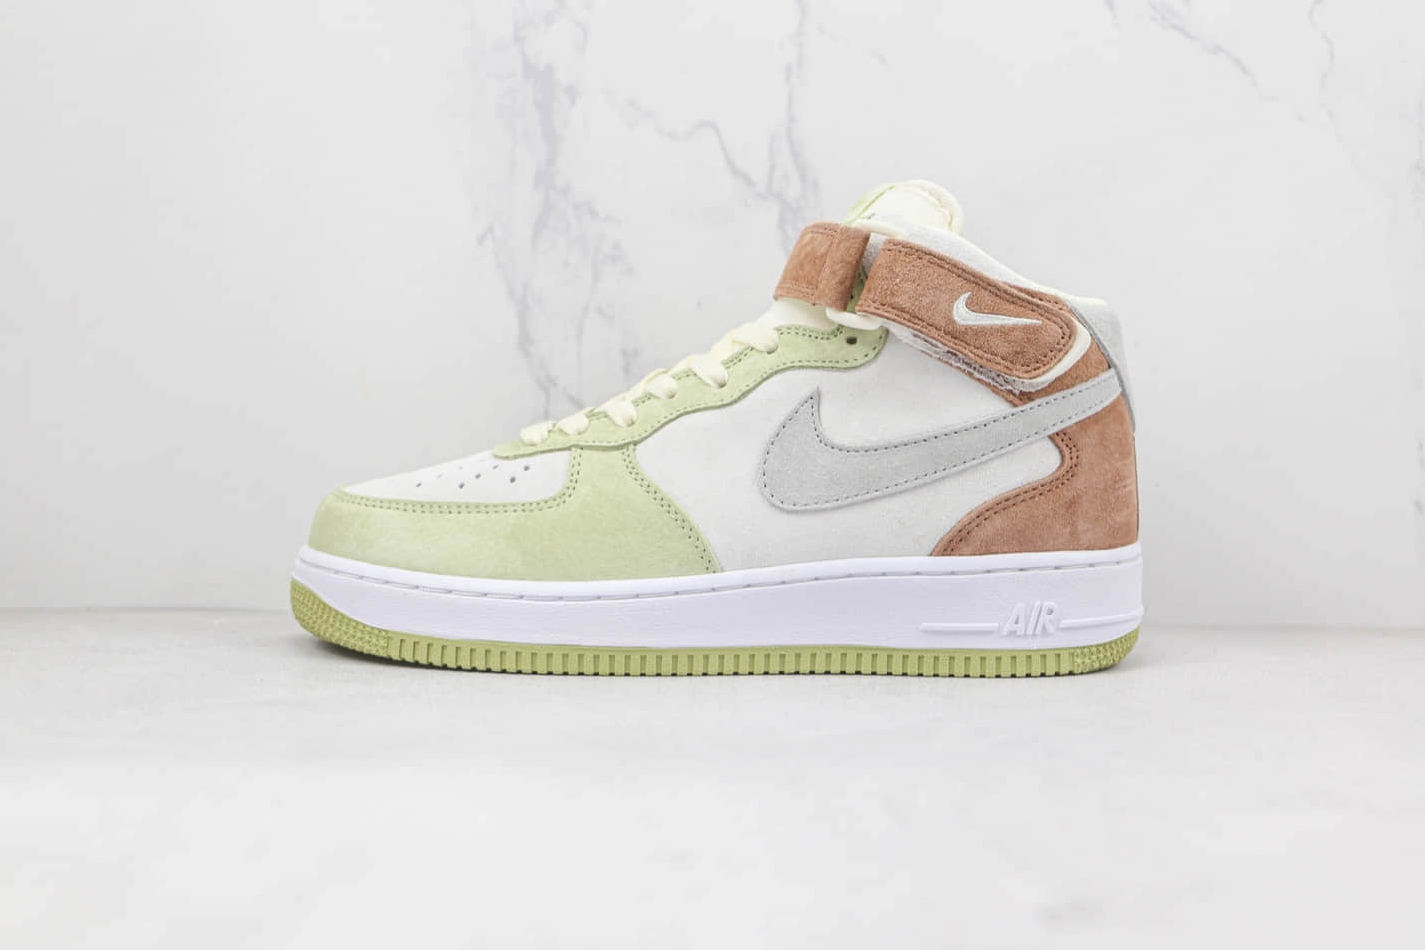 Nike Air Force 1 Mid 07 Light Green Grey White AL6896-558 - Stylish Footwear for All-Day Comfort